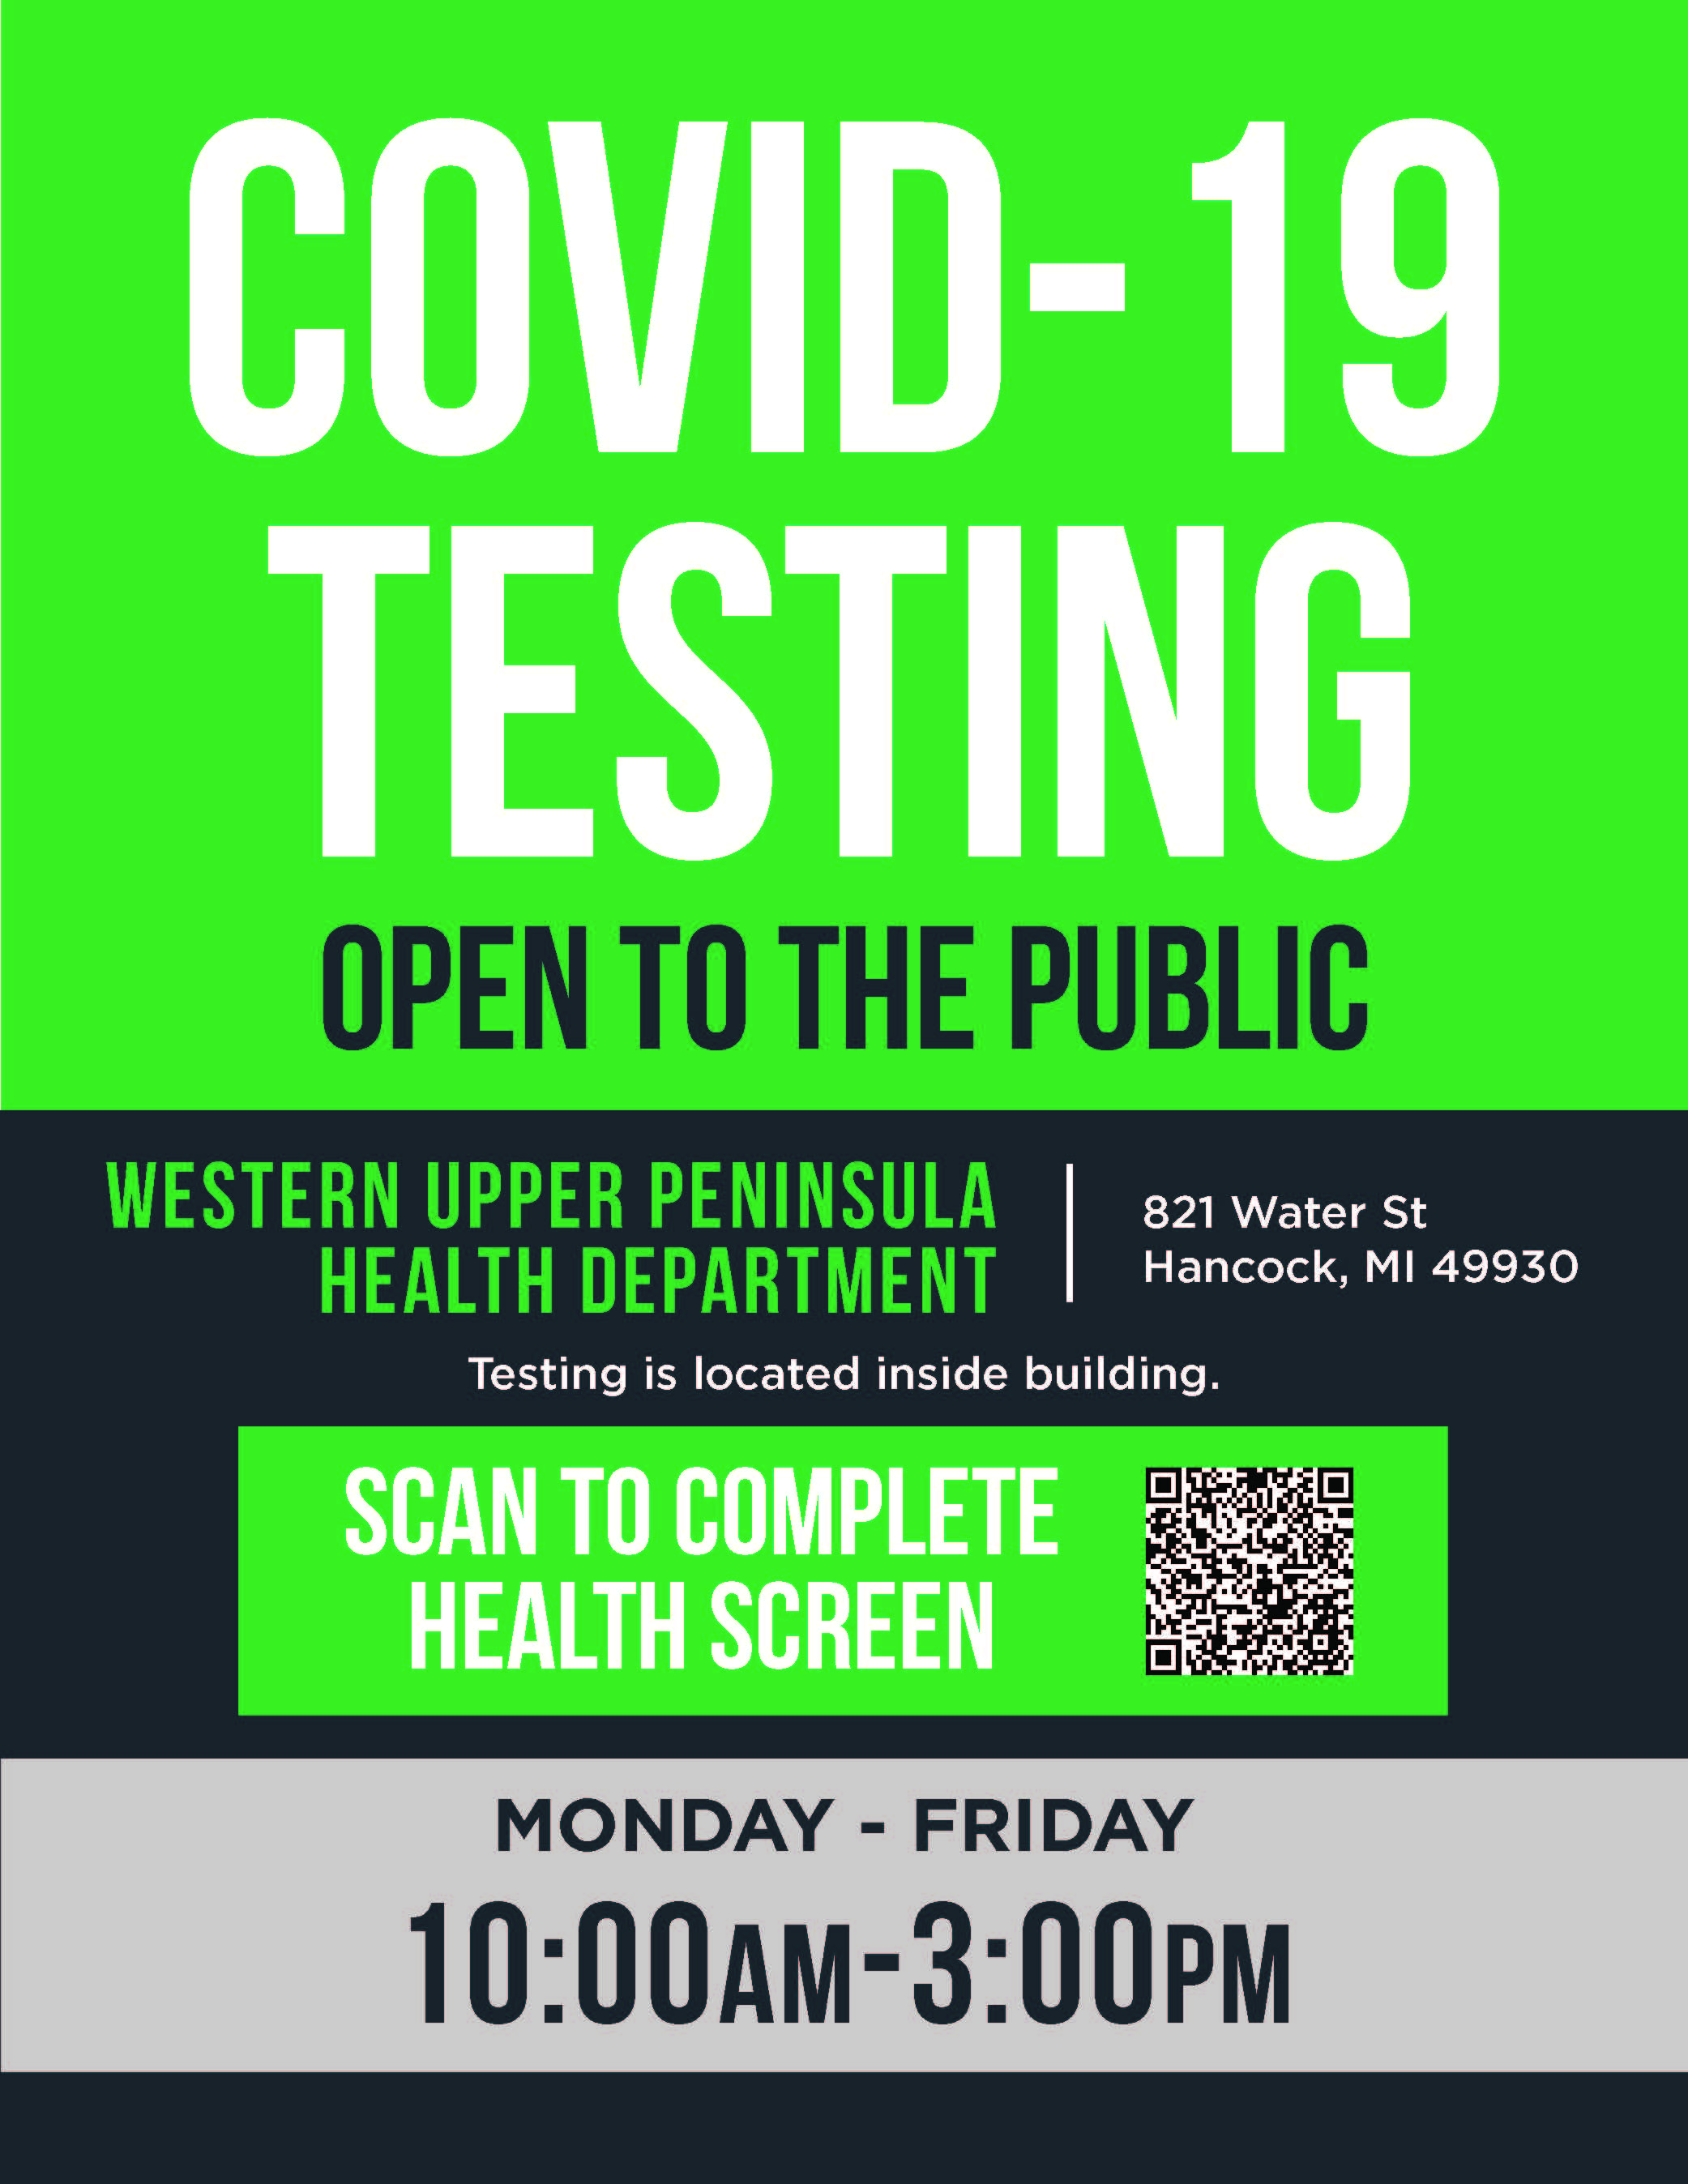 Western Upper Peninsula Health Department offering COVID-19 testing to the public.